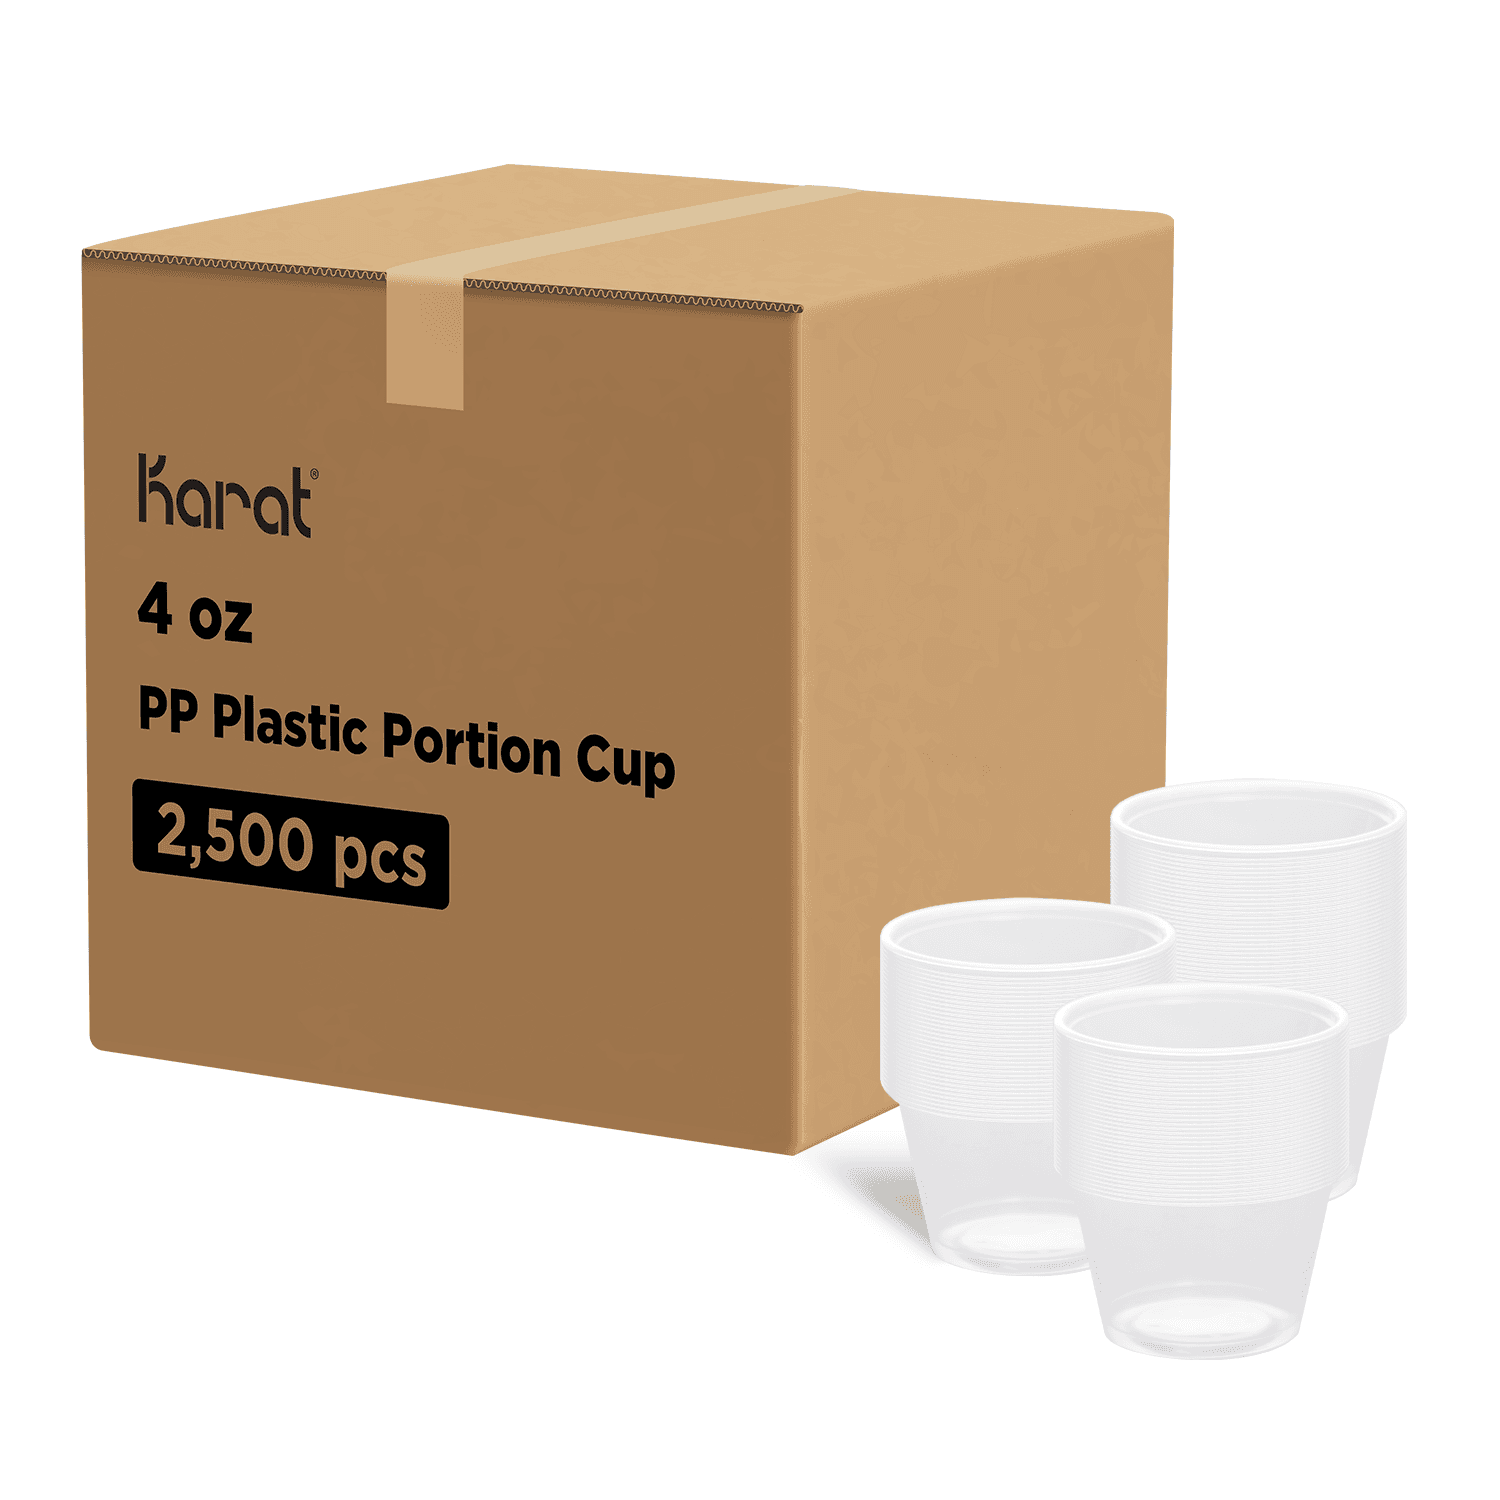 Clear Karat 4 oz PP Plastic Portion Cups stacked next to packaging